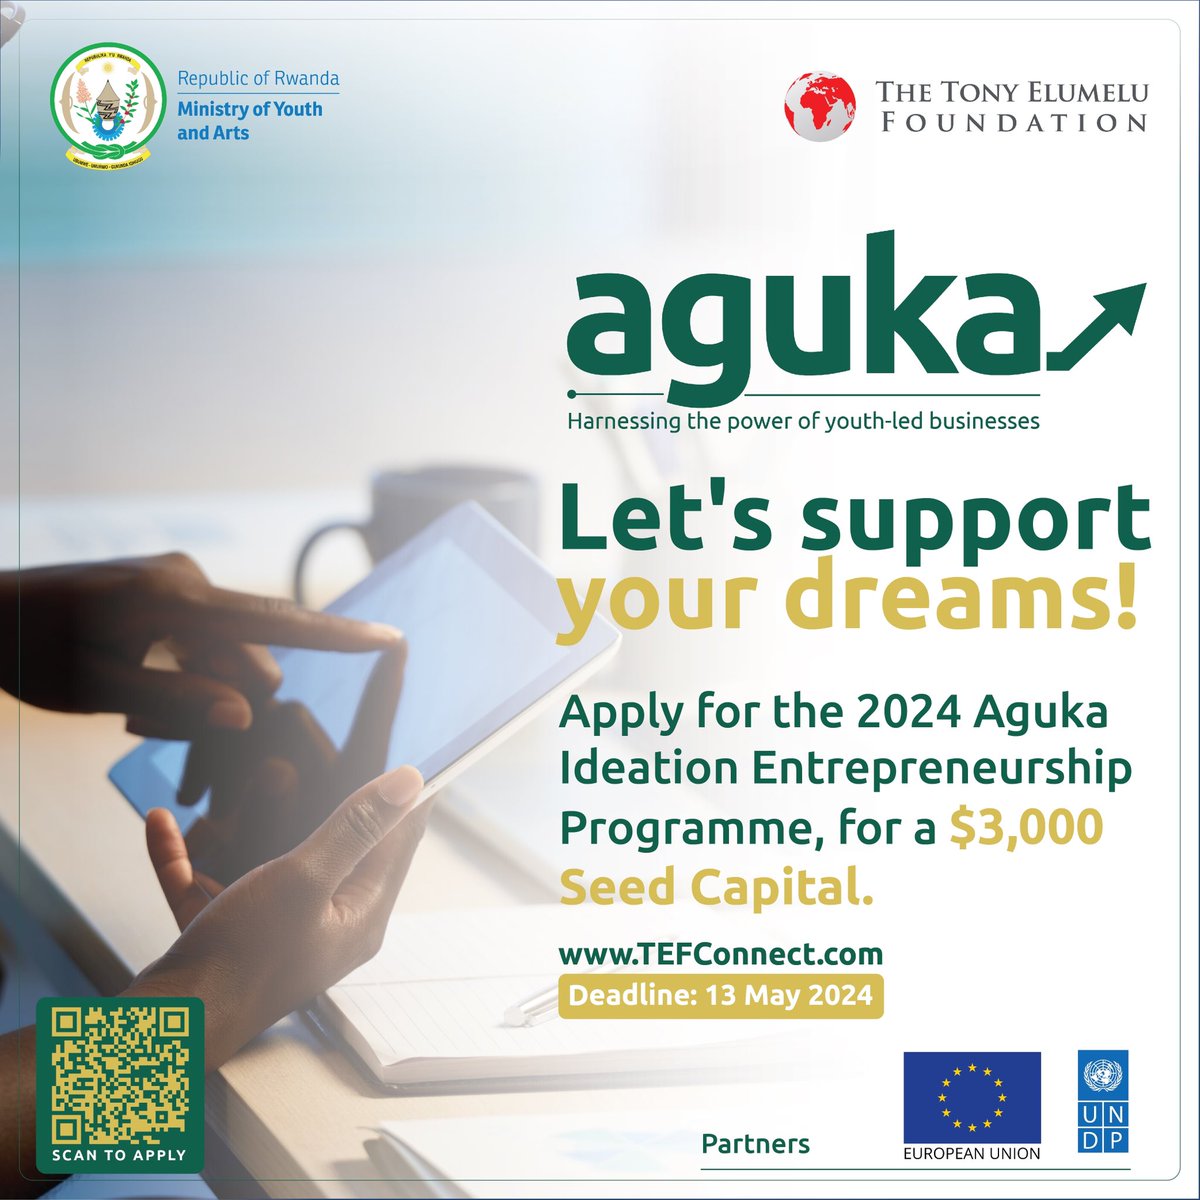 🚨Let's support your dreams! 📌Are you a young Rwandan with brilliant, innovative business idea? 📌Apply for the 2024 Aguka Ideation Entrepreneurship Programme, which offers business trainings, mentorship & seed capital of $3,000. 📌Link: tefconnect.com. #Aguka2024